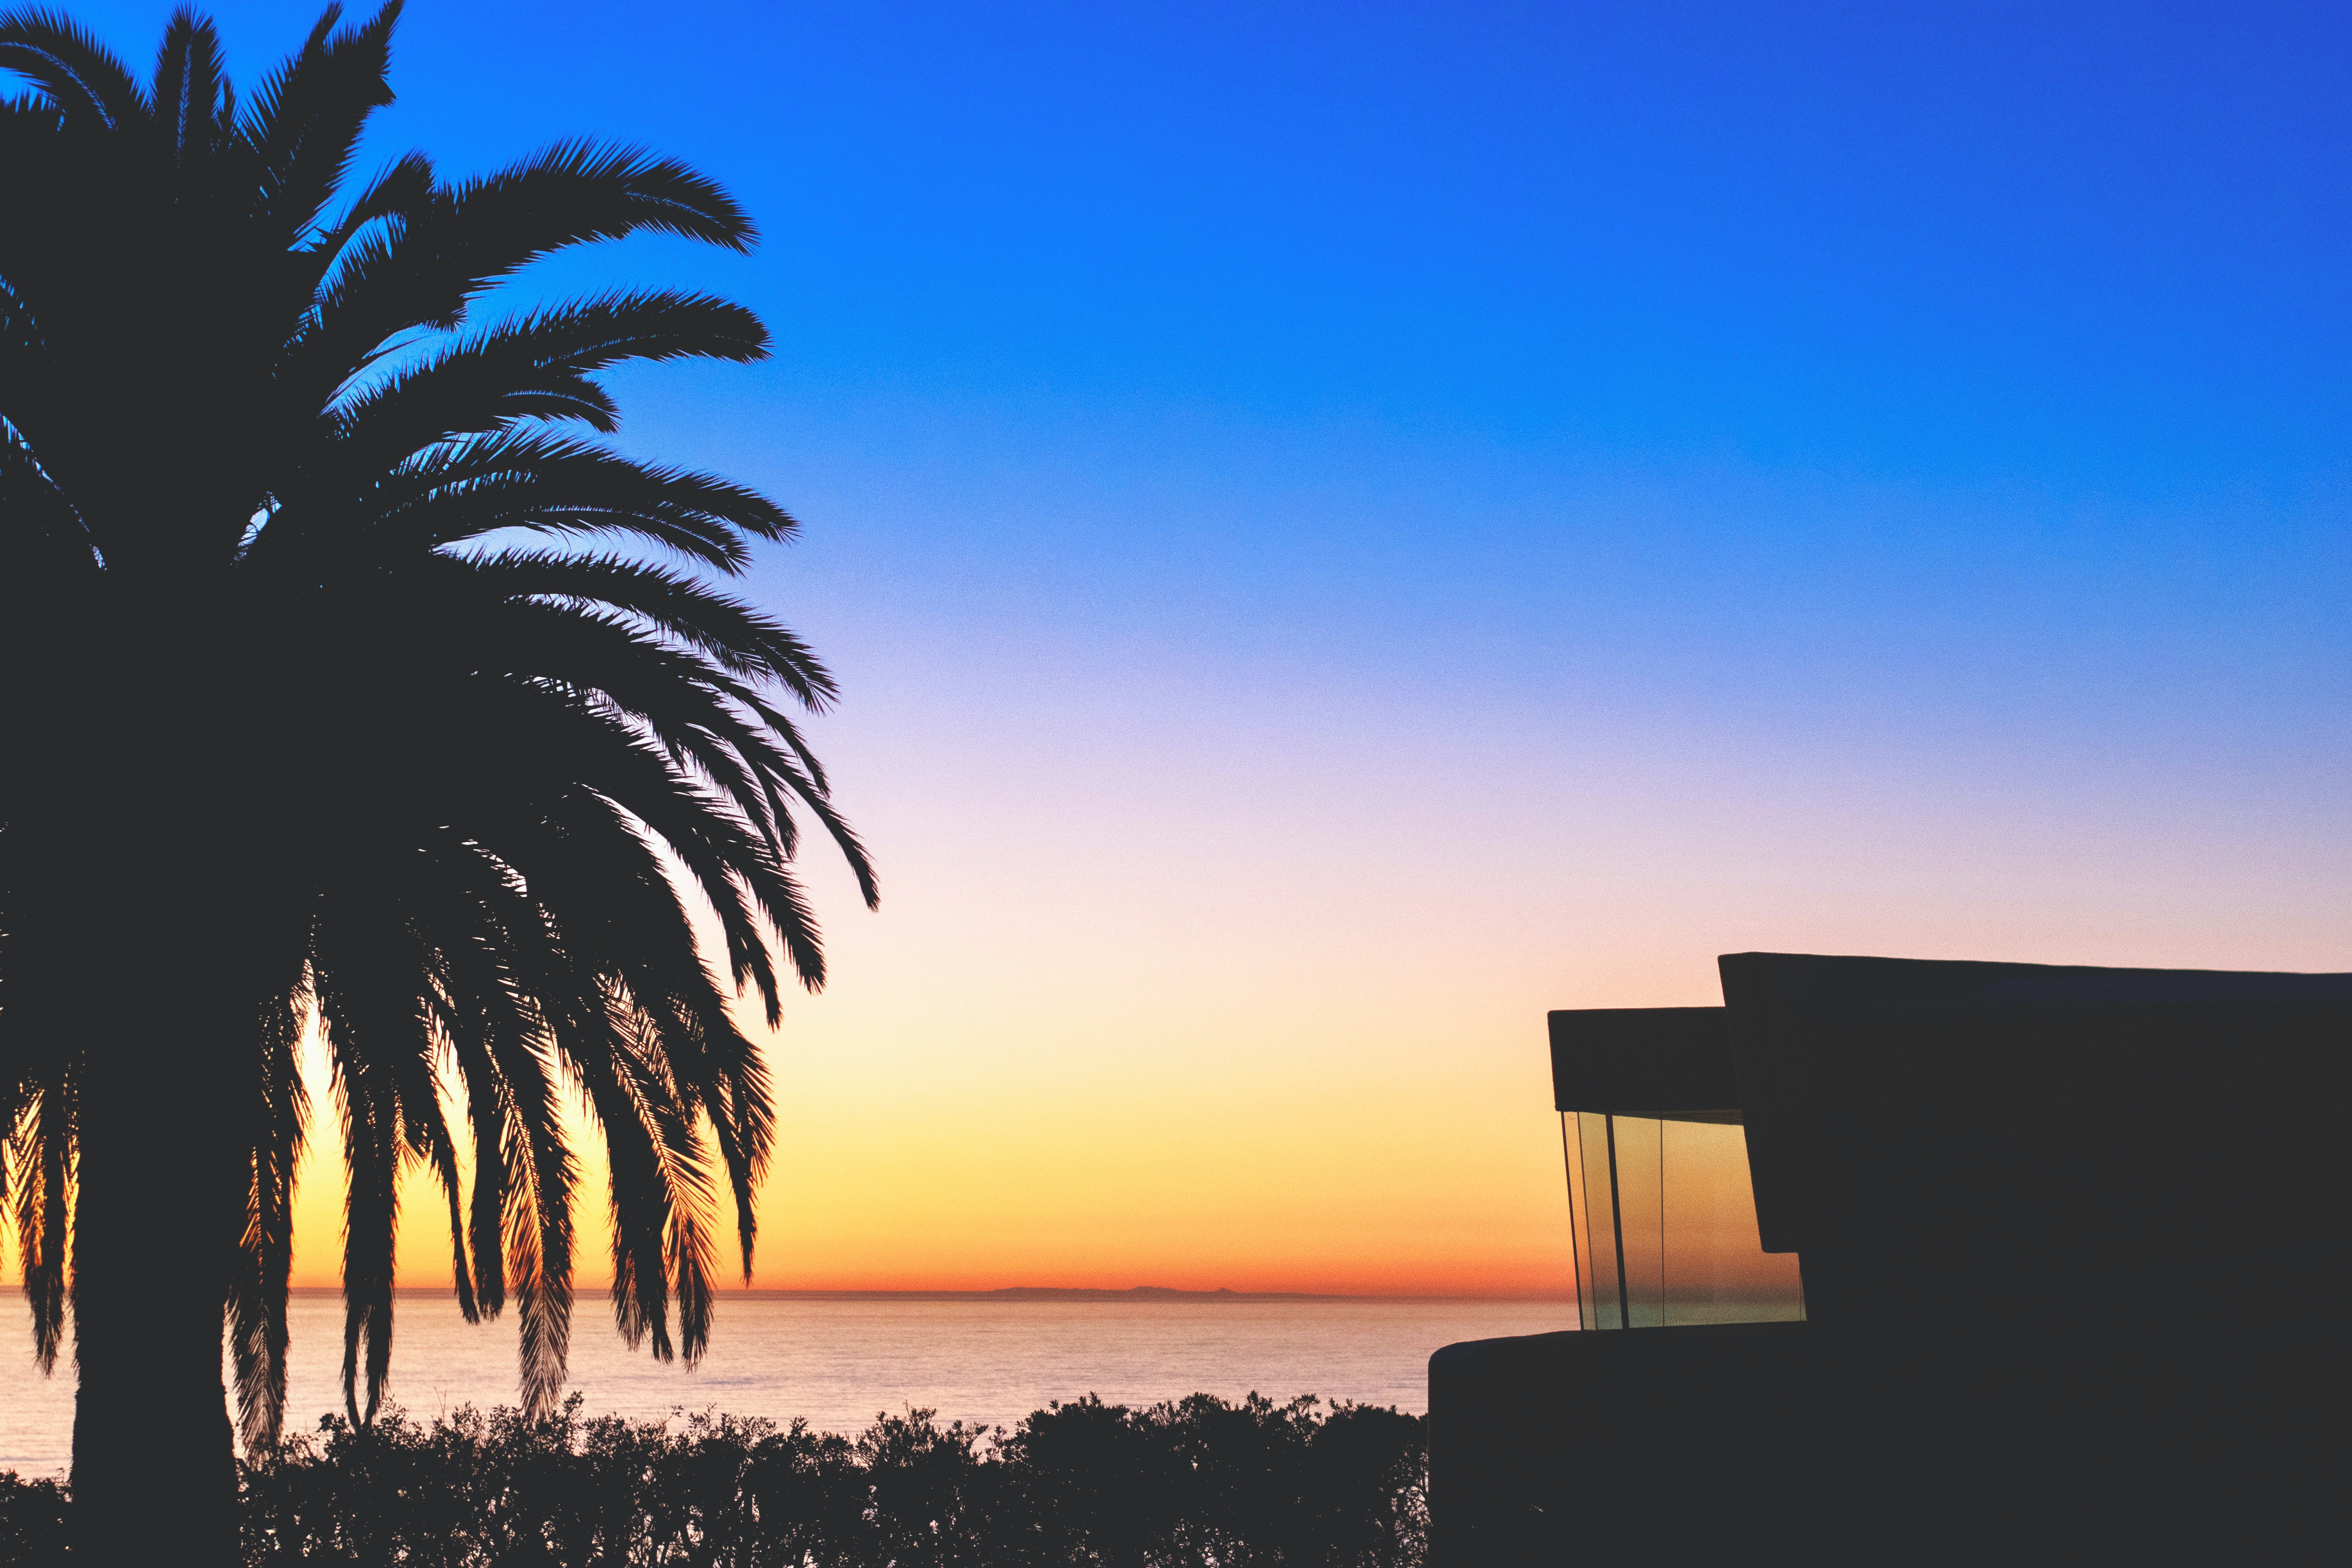 Silhouette of a modern house and a palm tree overlooking the sun setting over the ocean.